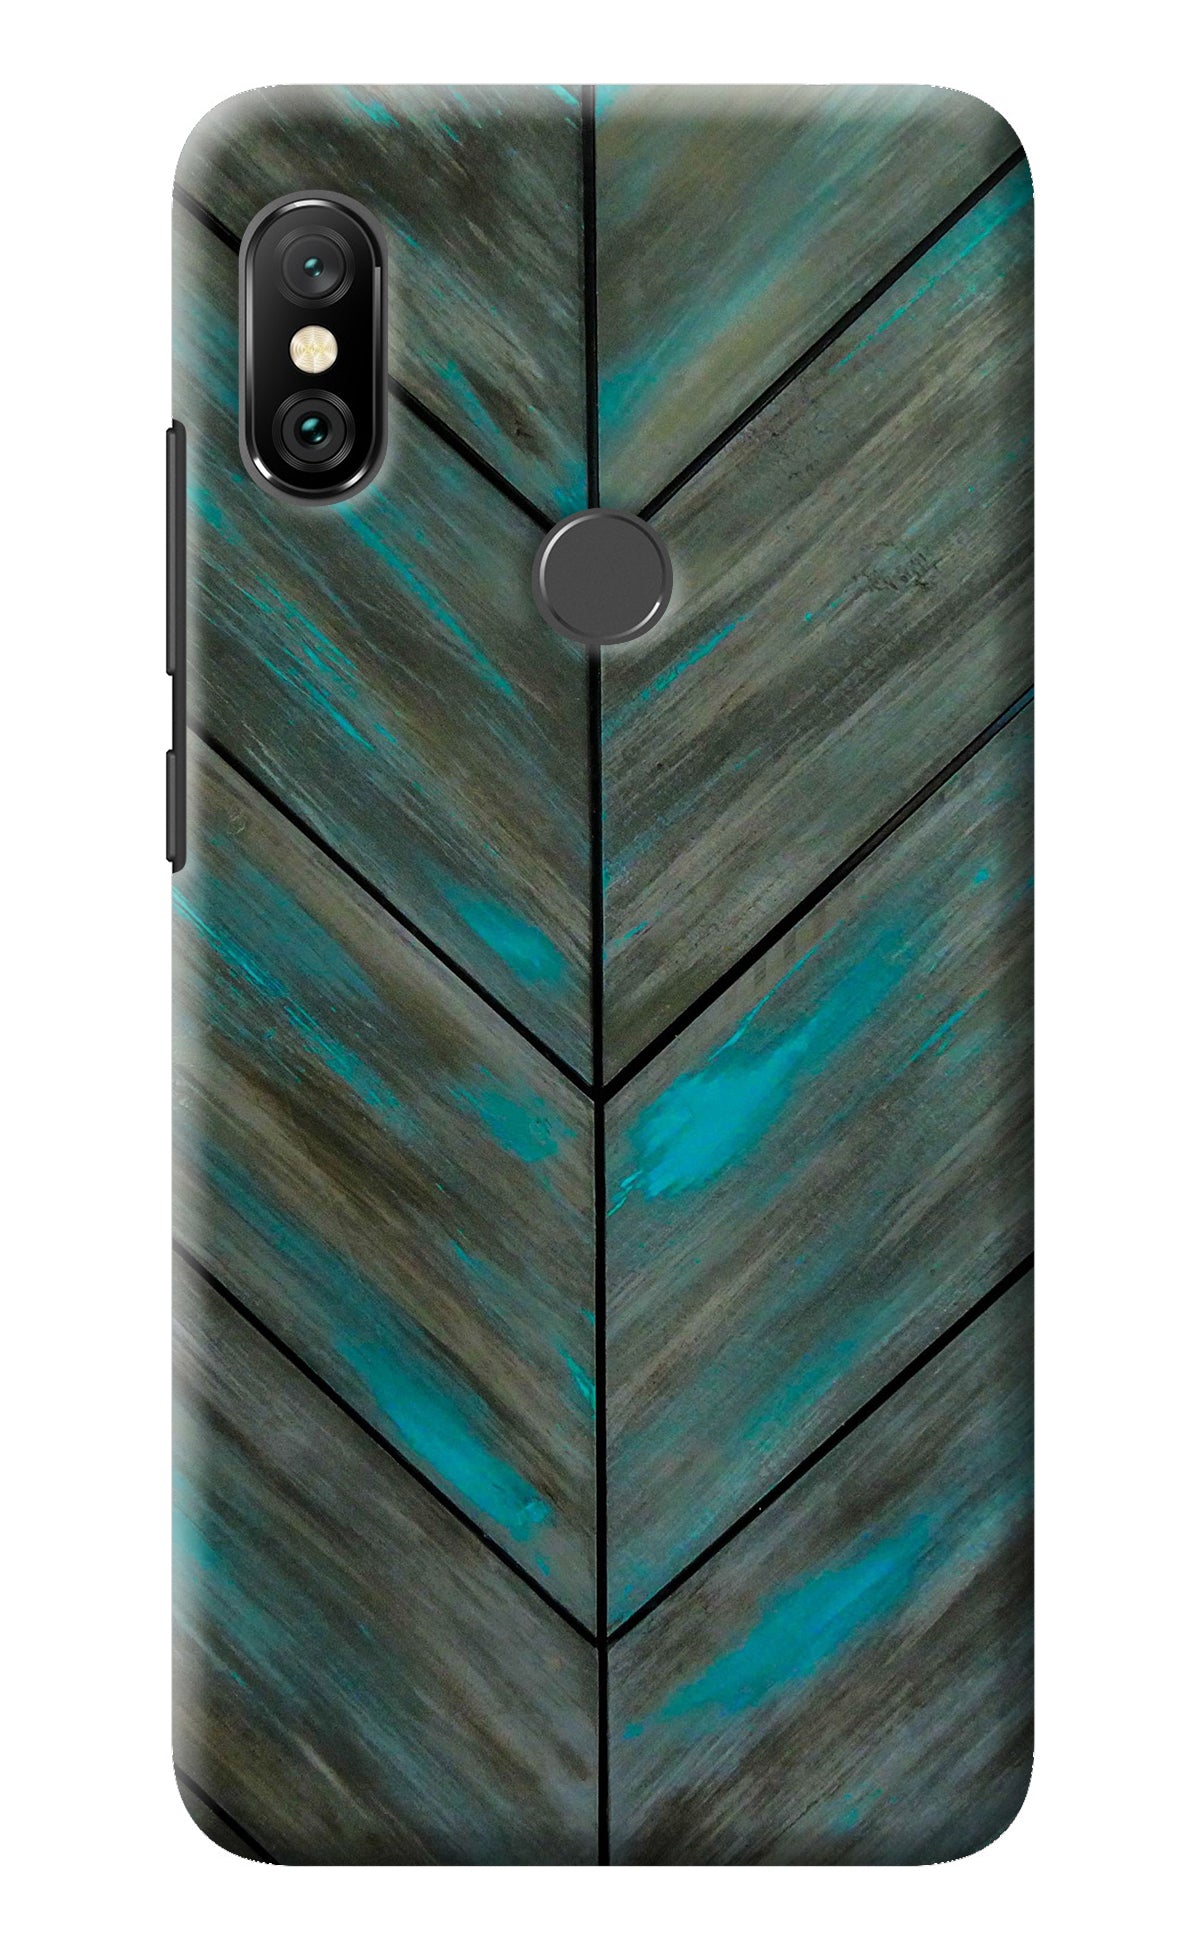 Pattern Redmi Note 6 Pro Back Cover